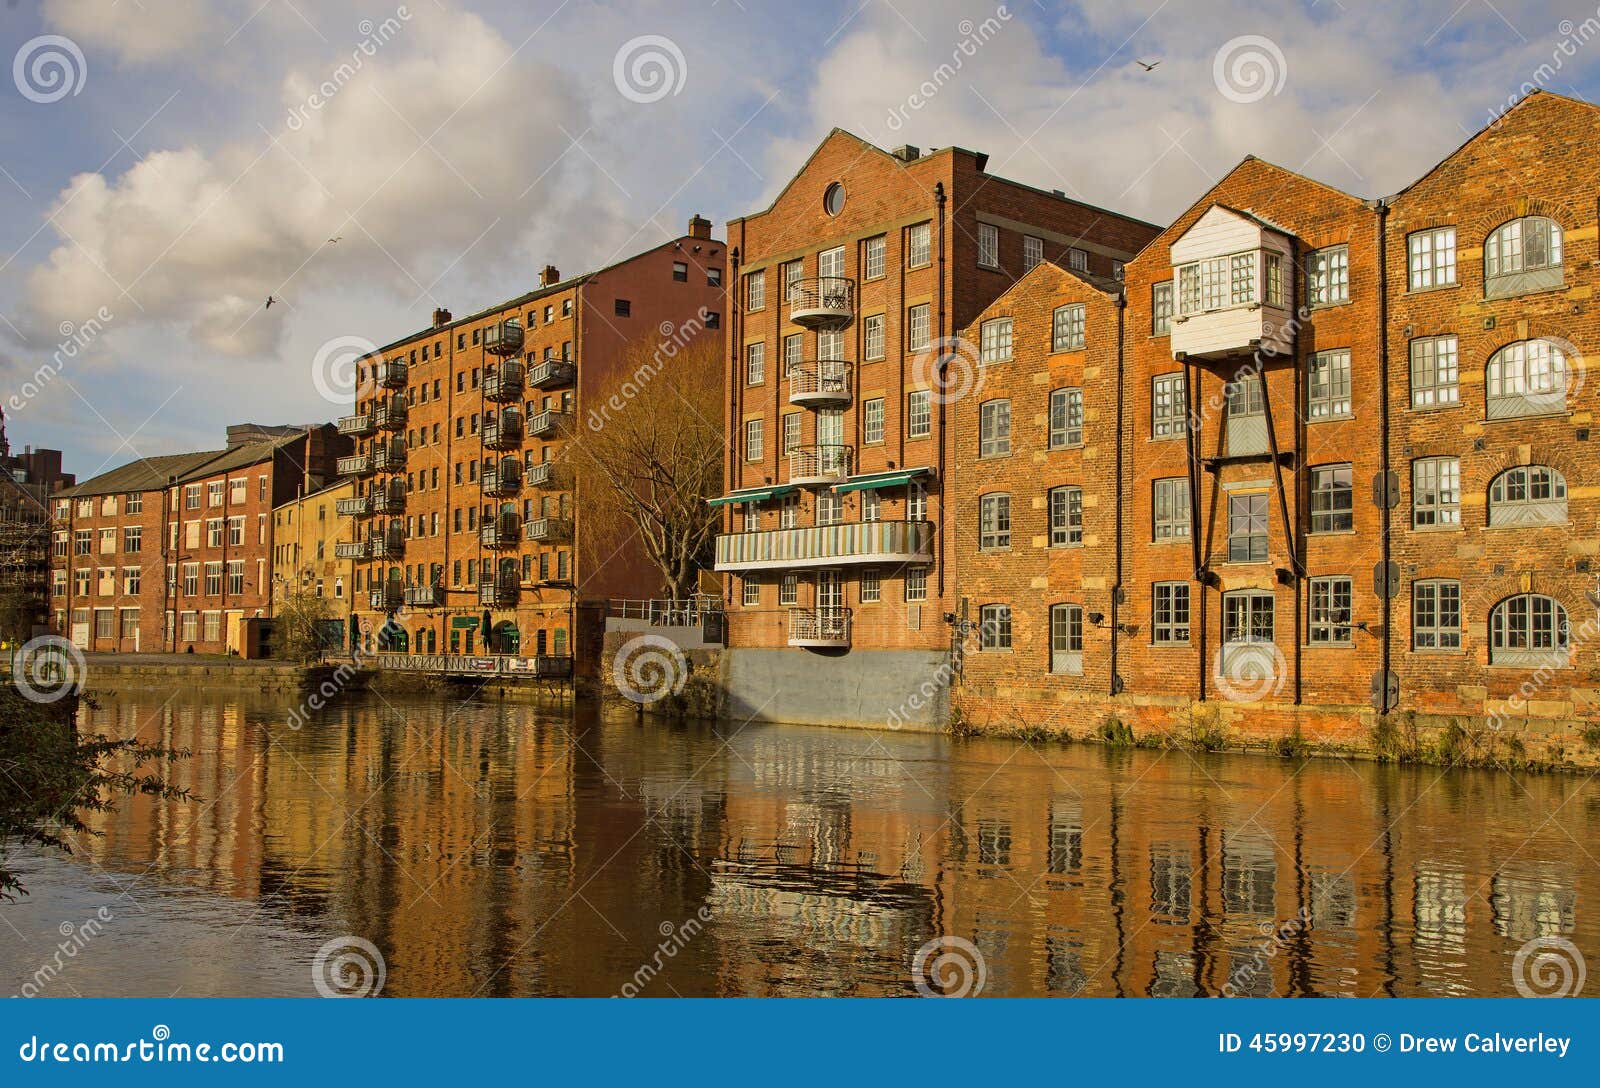 redevelopment alongside the rive aire, leeds yorkshire